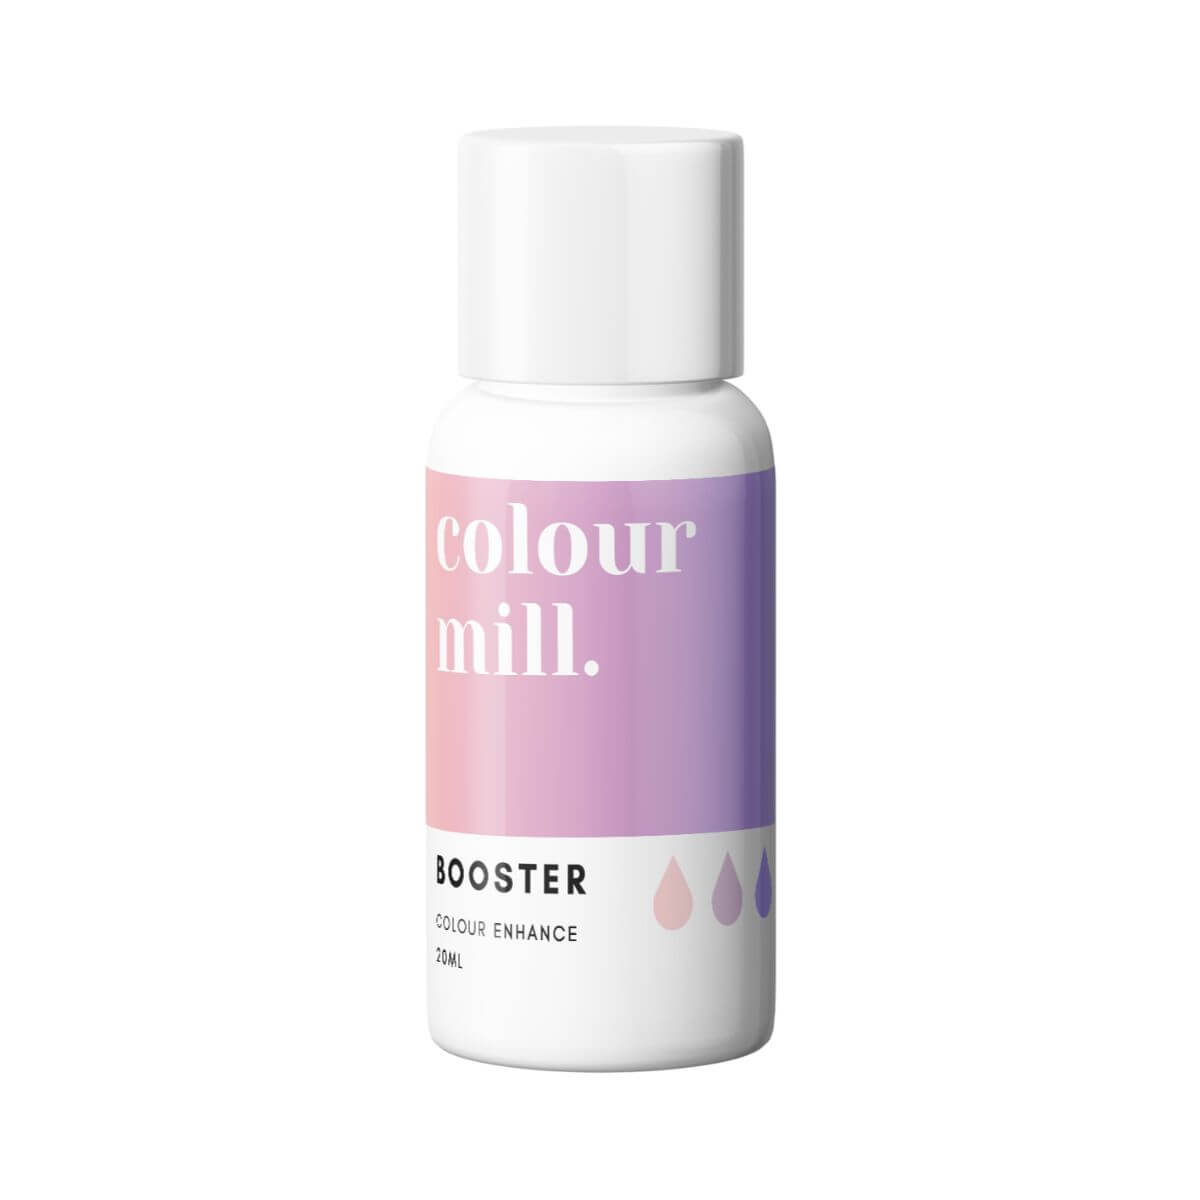 Colour Mill Next Generation Oil Based Icing Colouring - 20ml